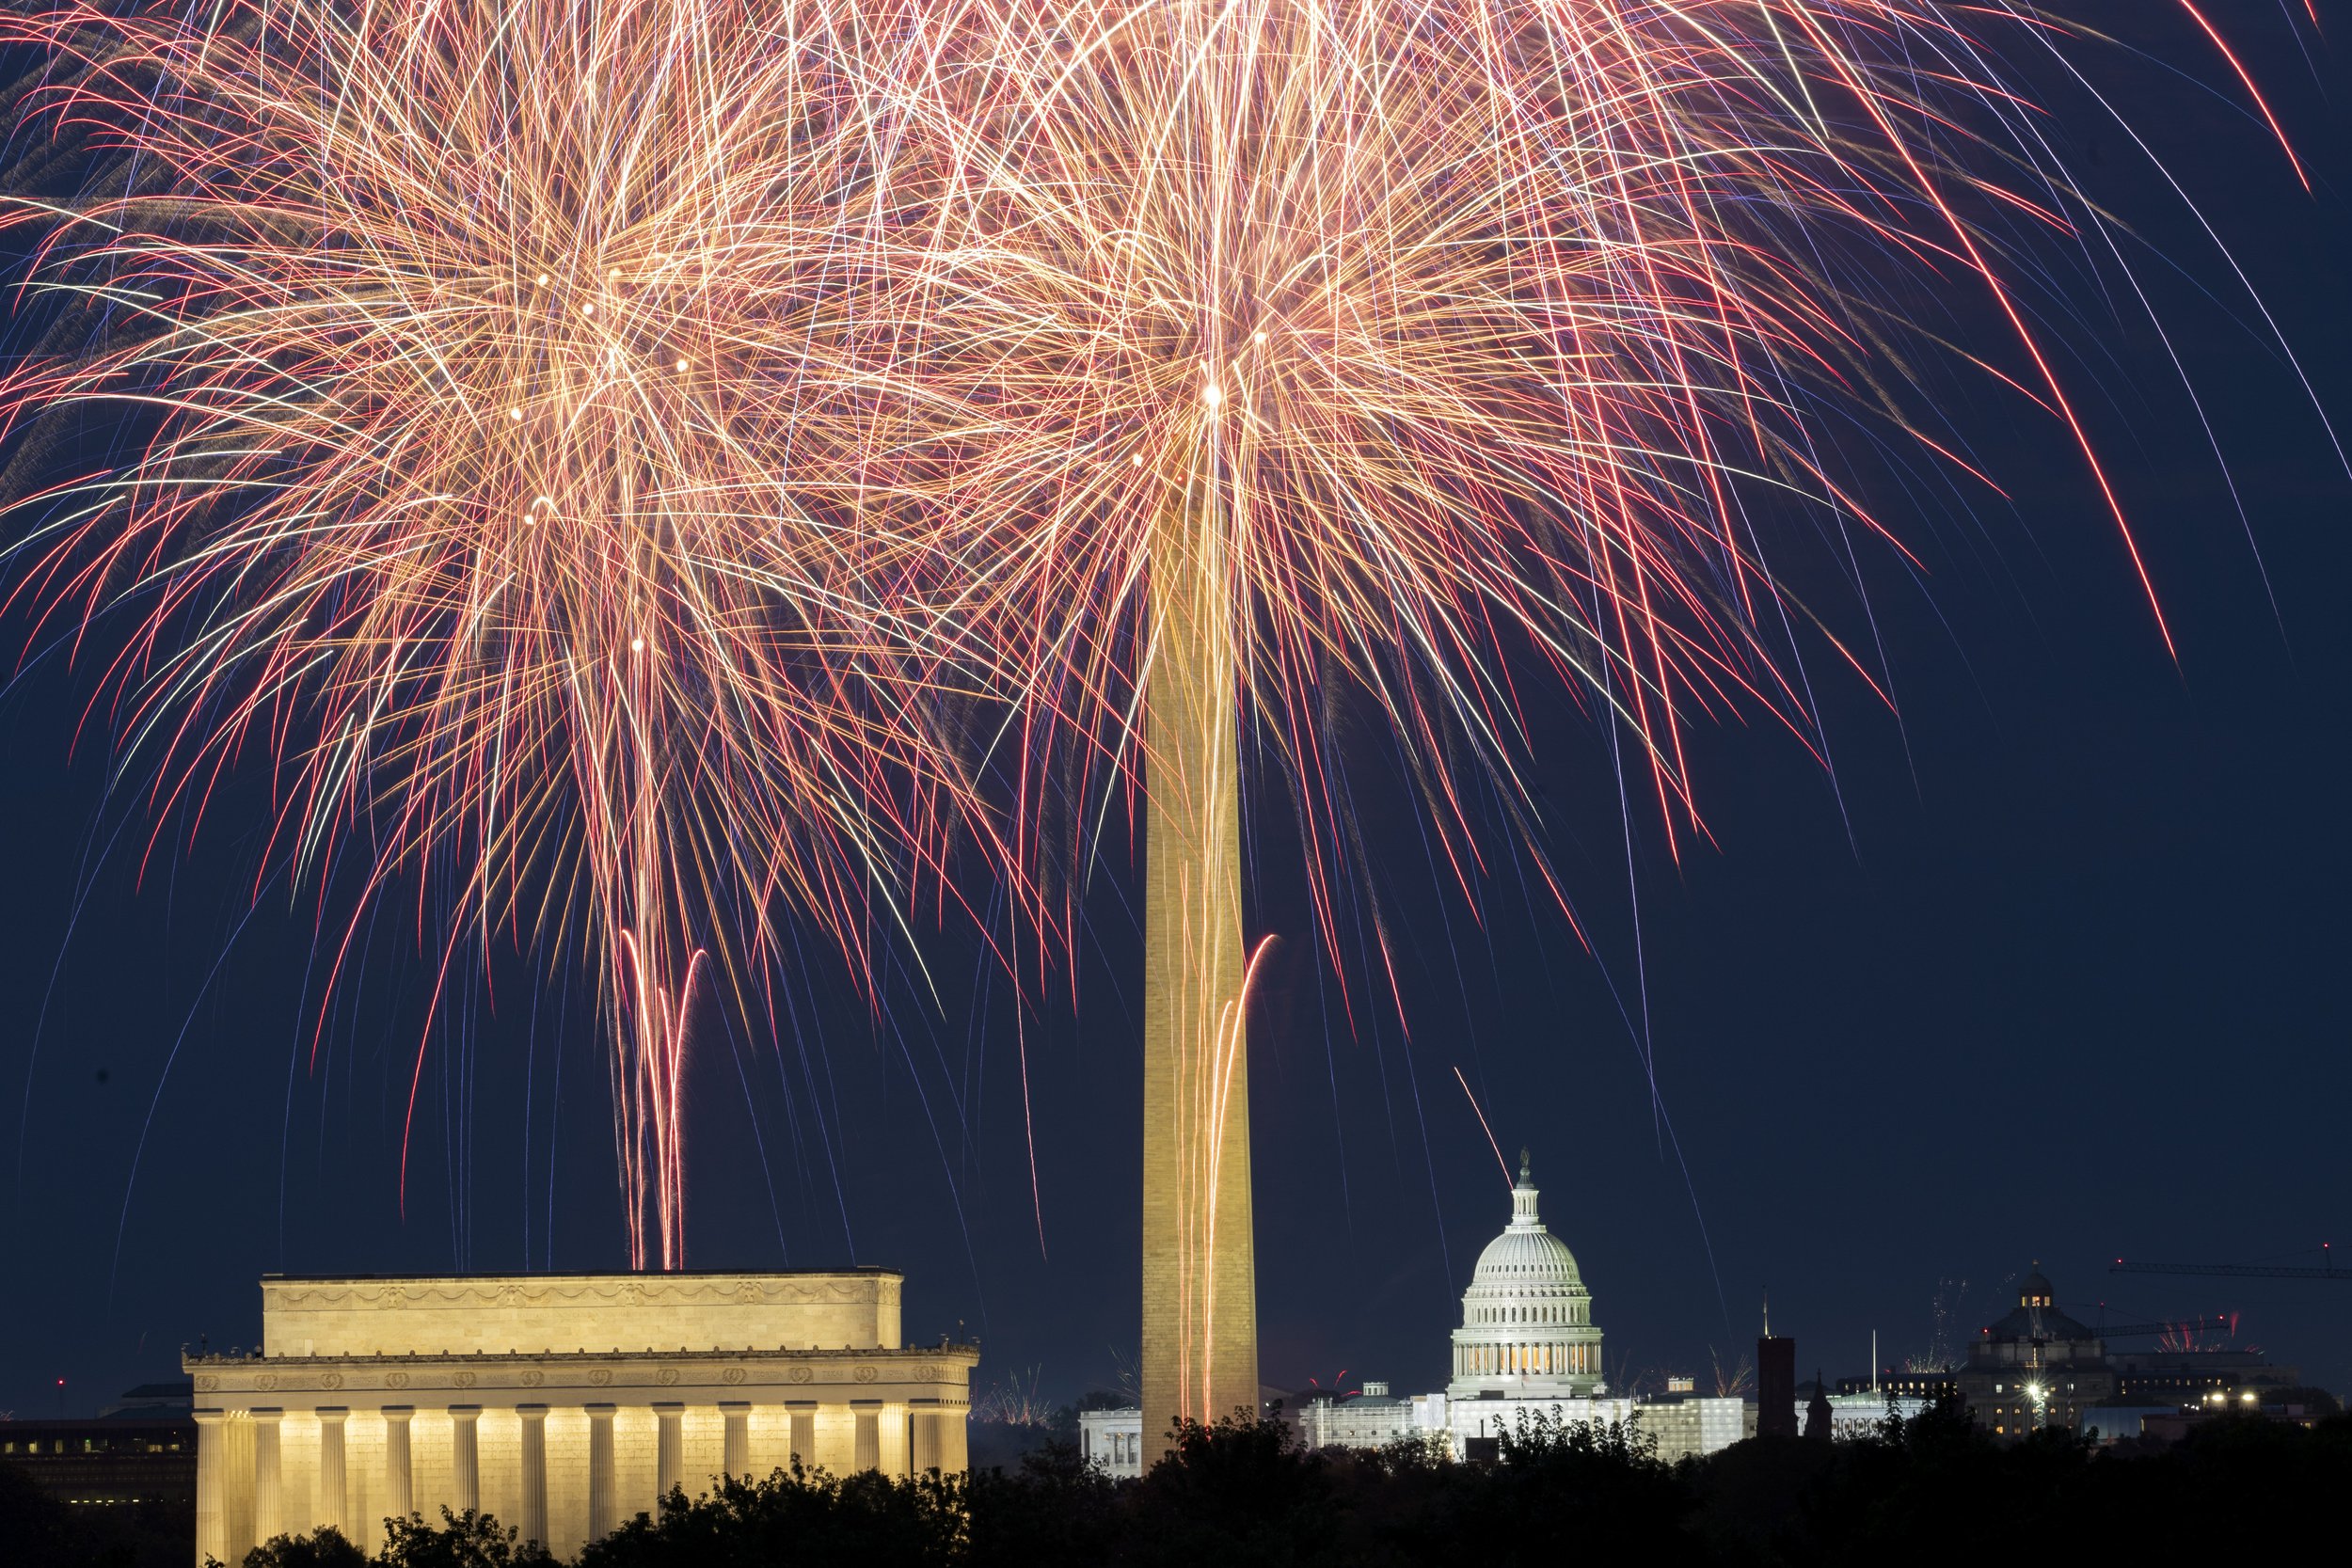  Fireworks burst above the National Mall and, from left, the Lincoln Memorial, Washington Monument and the U.S. Capitol building, during Independence Day celebrations in Washington on July 4, 2023. (AP Photo/Stephanie Scarbrough) 